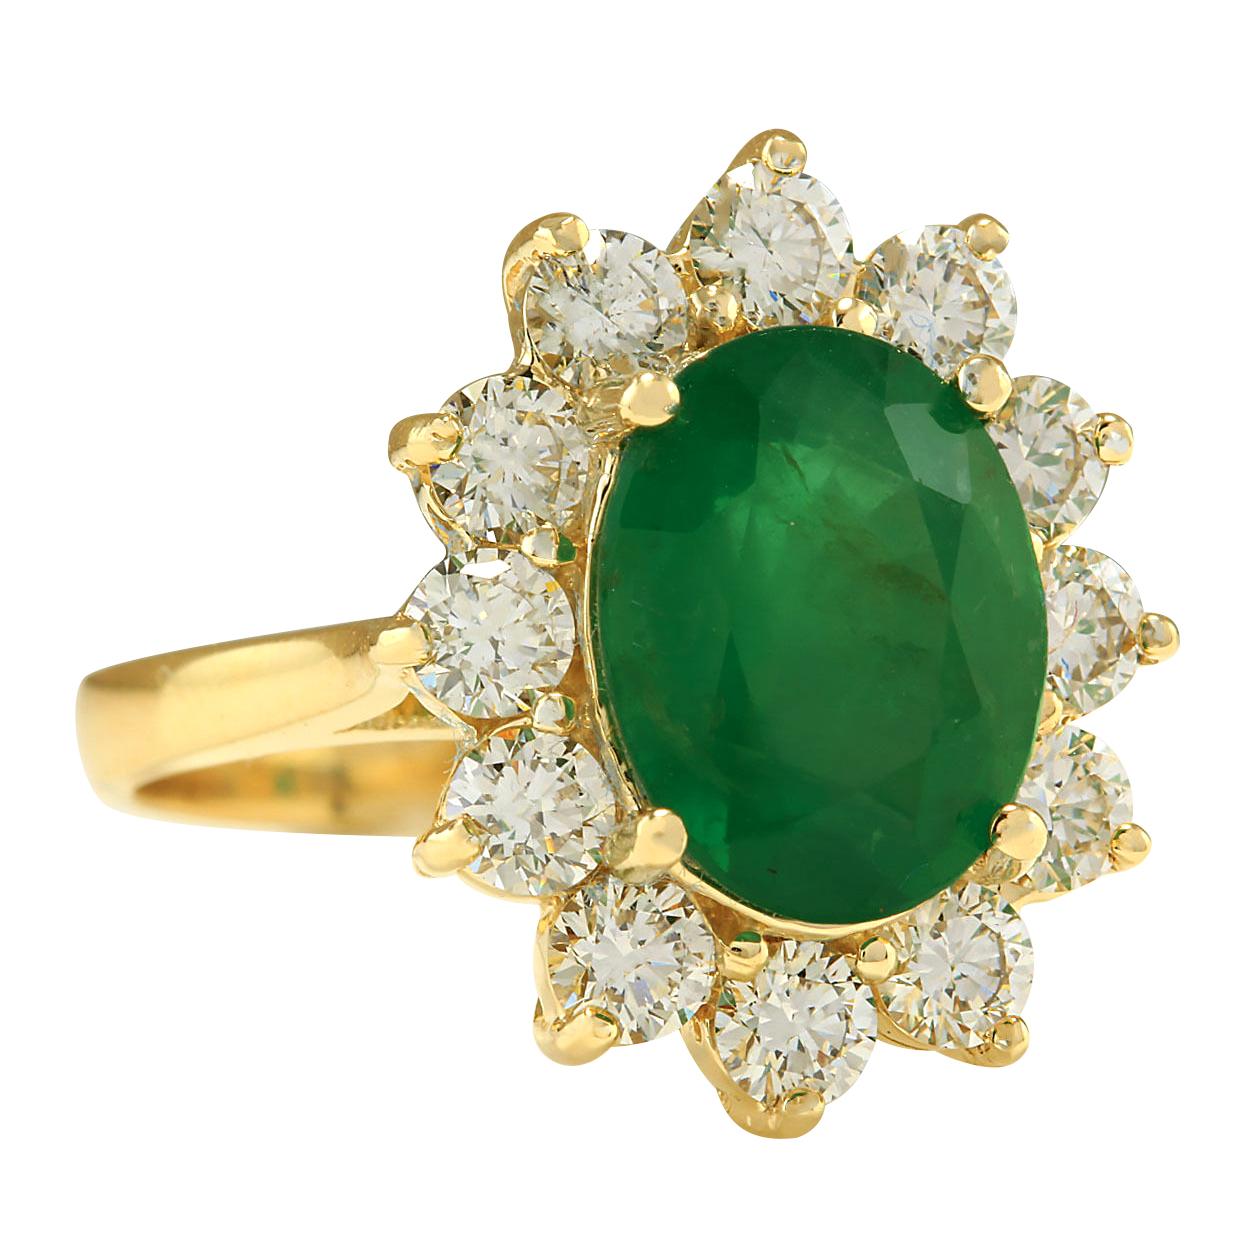 4.75 Carat Natural Emerald 14 Karat Yellow Gold Diamond Ring
Stamped: 14K Yellow Gold
Total Ring Weight: 5.7 Grams
Total Natural Emerald Weight is 3.34 Carat (Measures: 11.00x9.00 mm)
Quantity: 1
Shape: Oval
Treatment: Oiling
Color: Green
Total